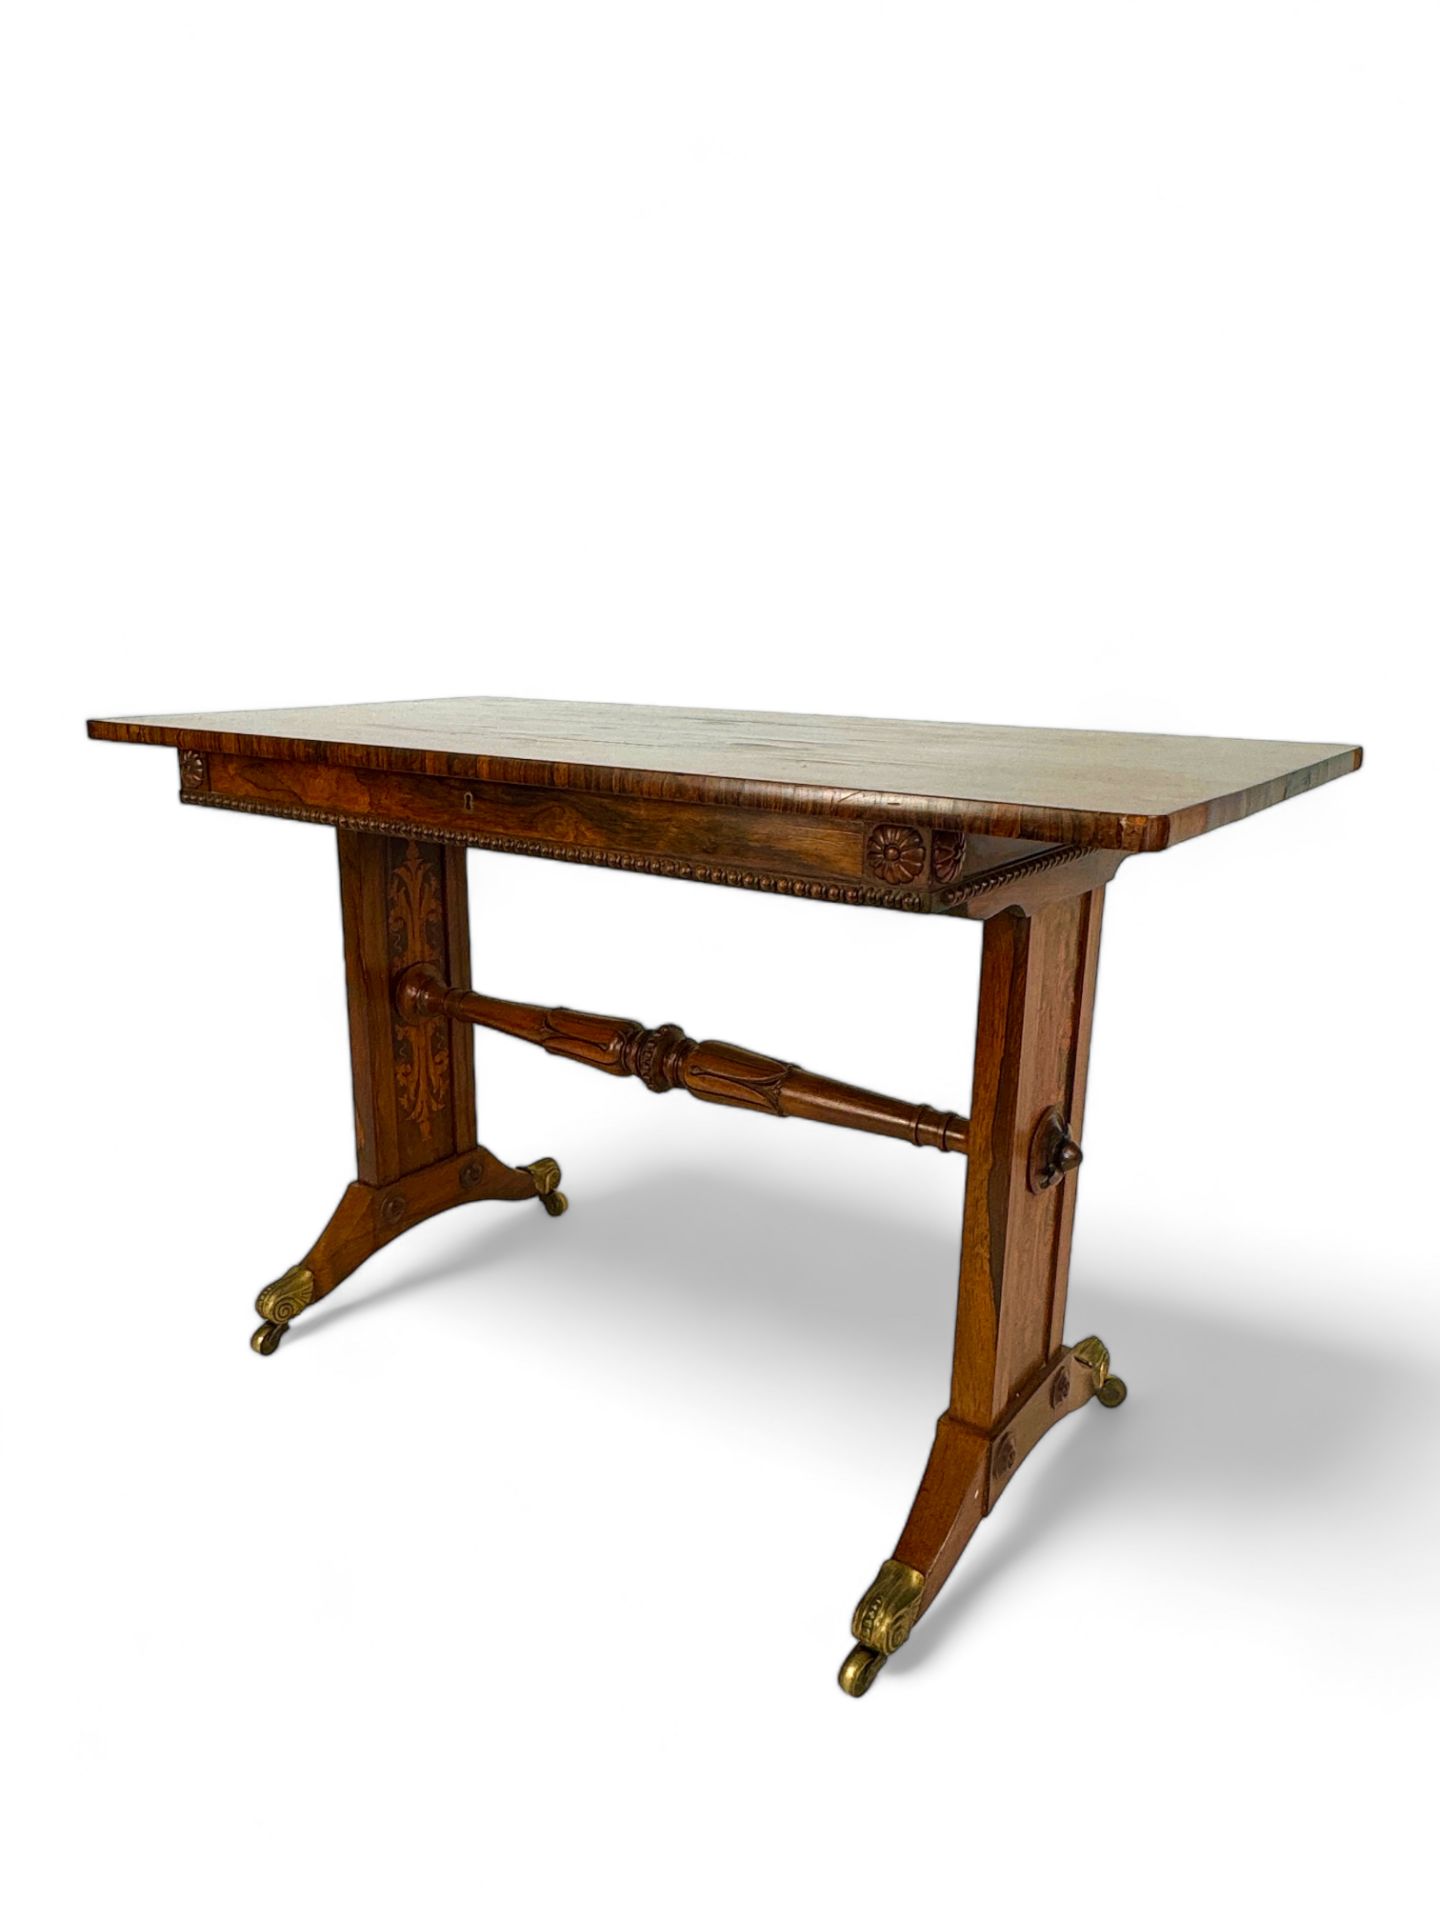 A Regency gonçalo alves and sycamore marquetry library table - Image 2 of 6